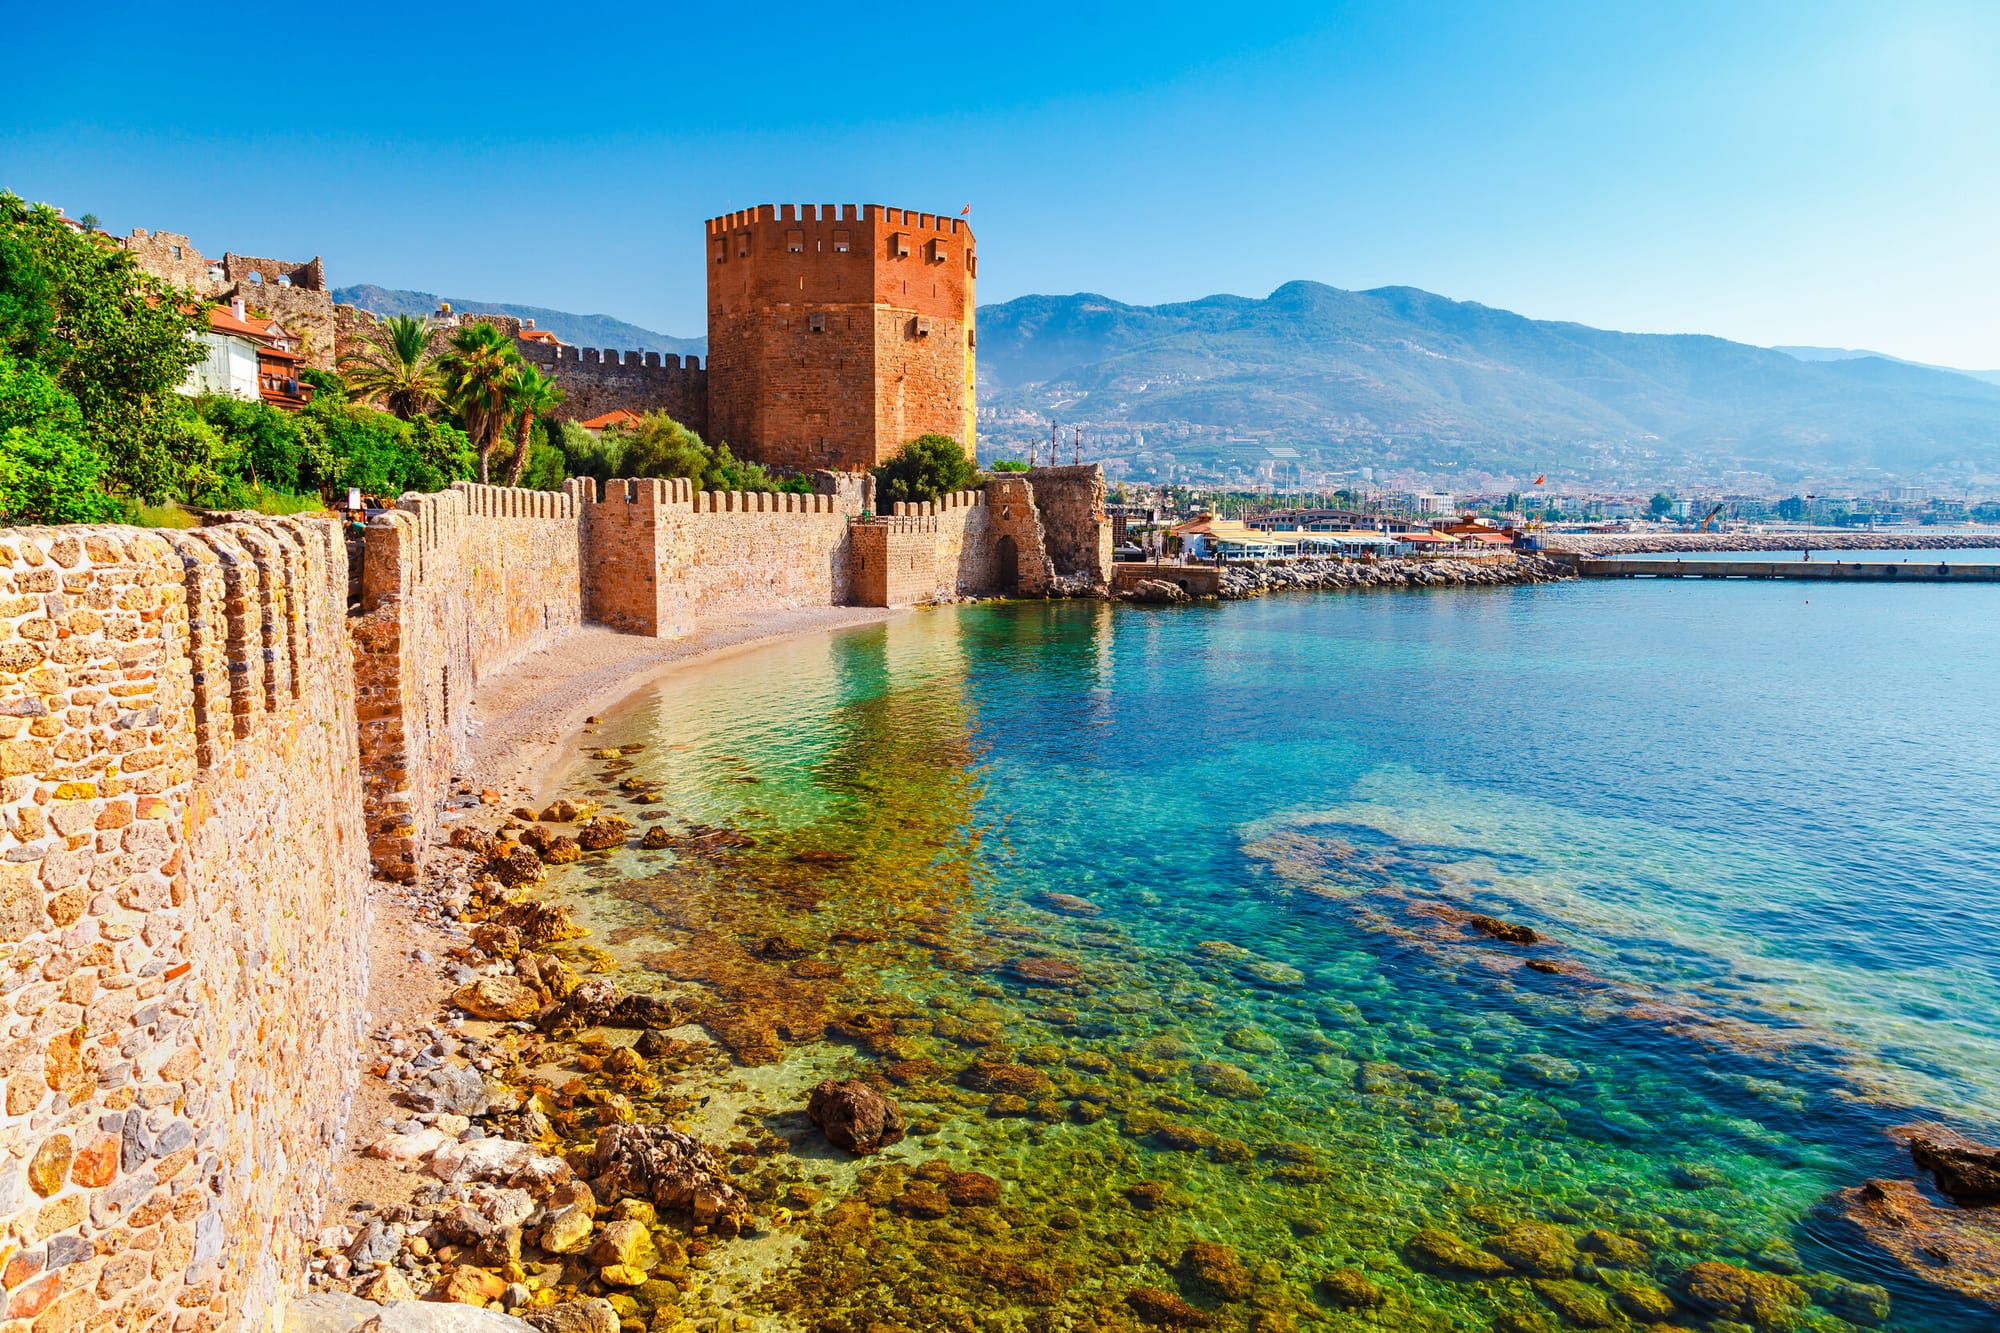 The Best Attractions and Things To Do in Antalya